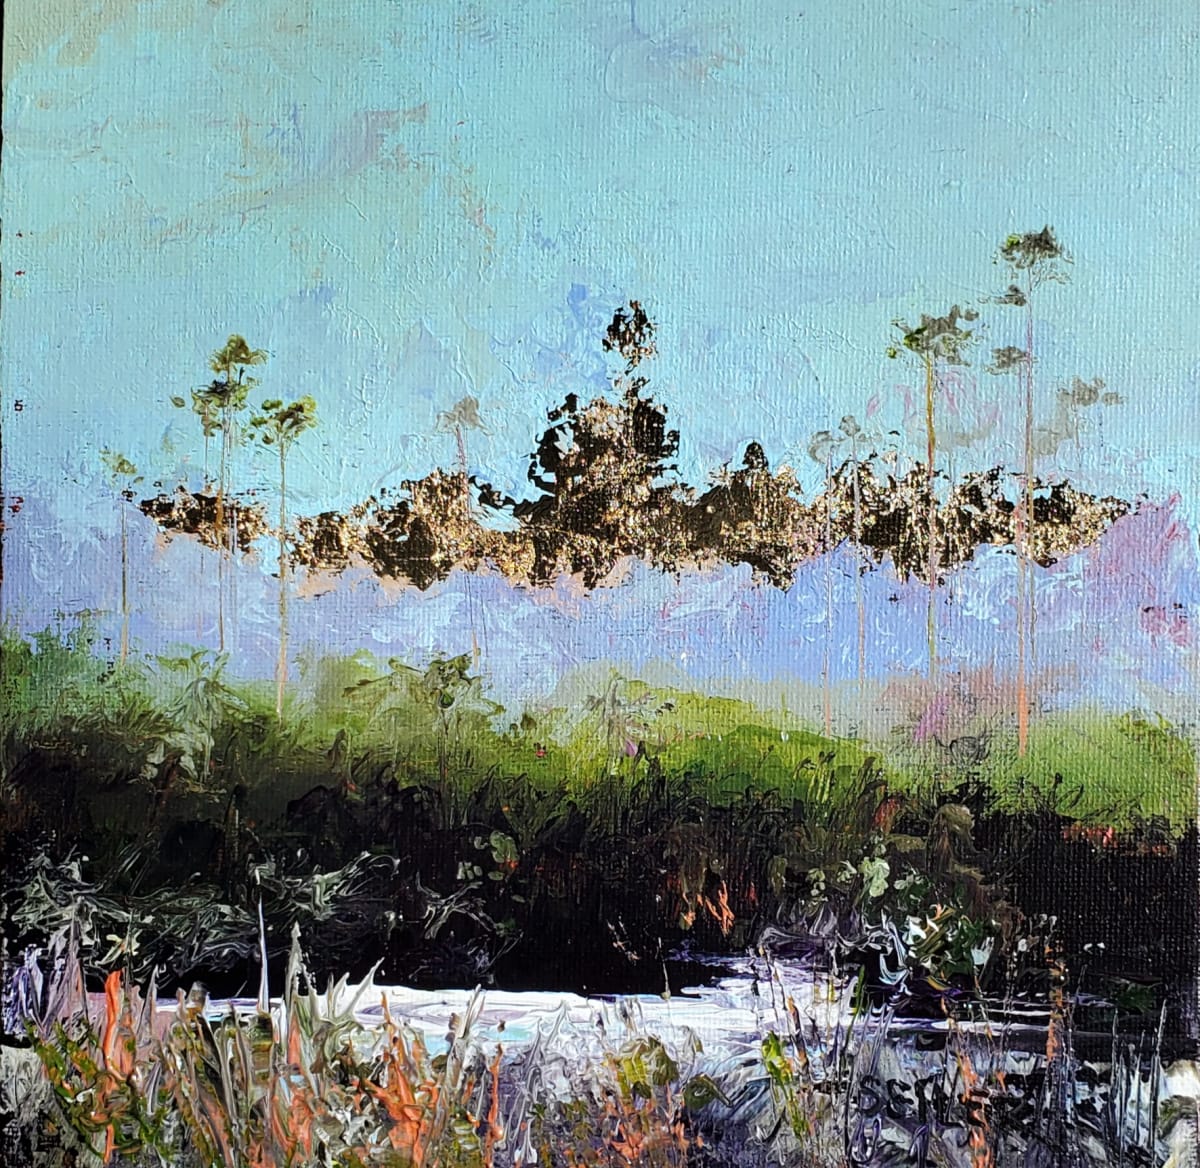 Still Dont Want To Go In There by Jill Seiler  Image: Florida has some wild areas.  I won't go.  Acrylic with gold leaf. 